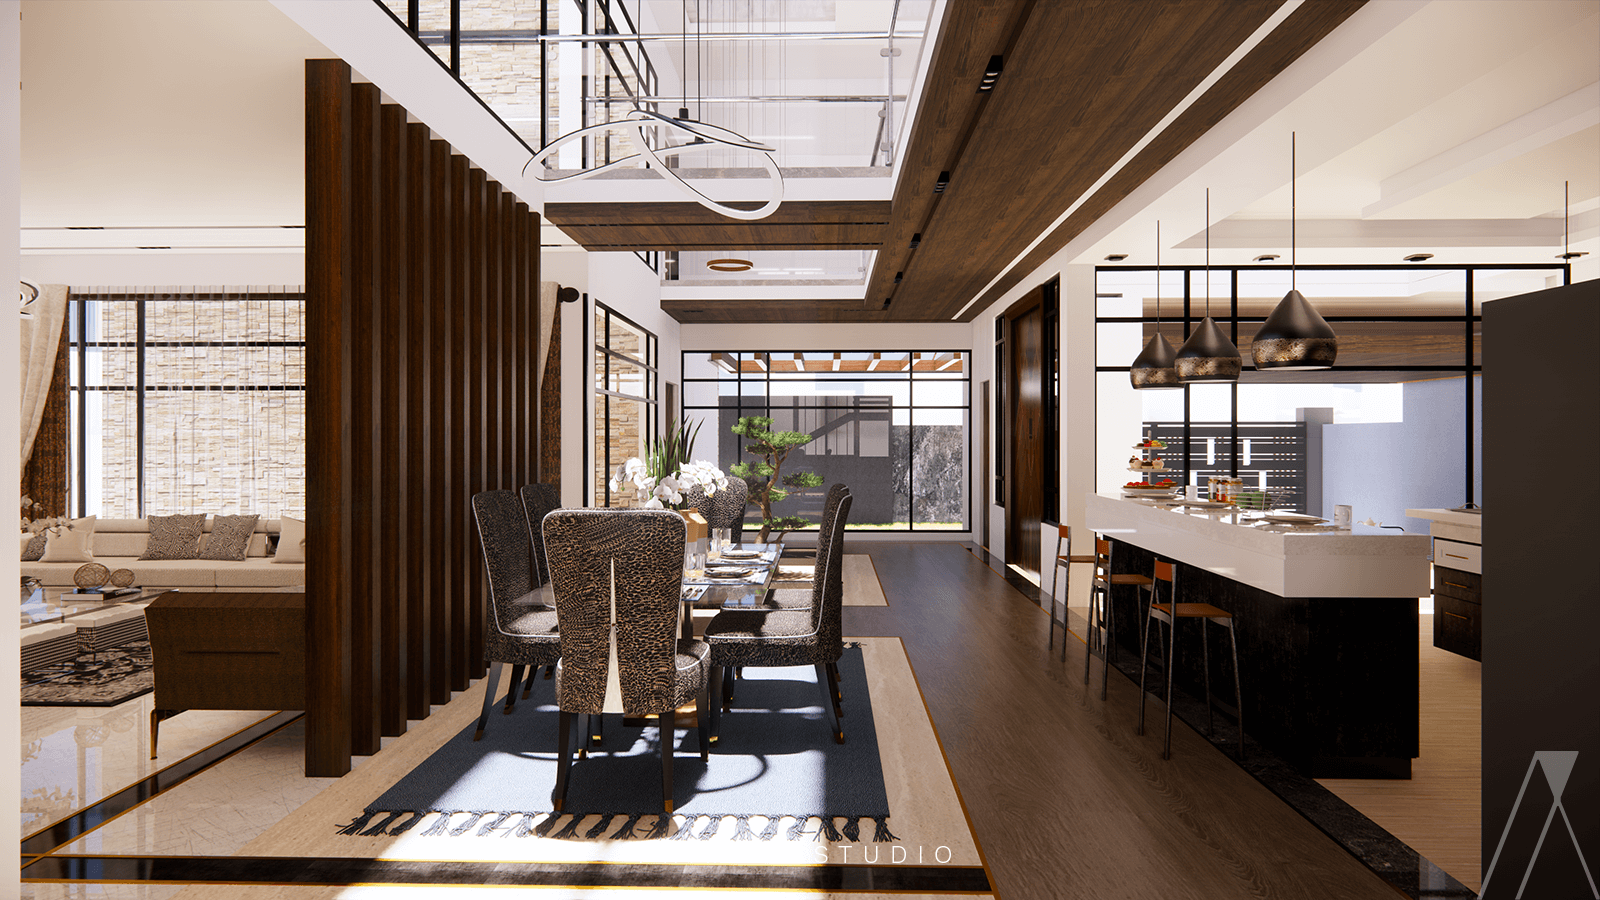 Dining table and open kitchen design - View from main house lobby